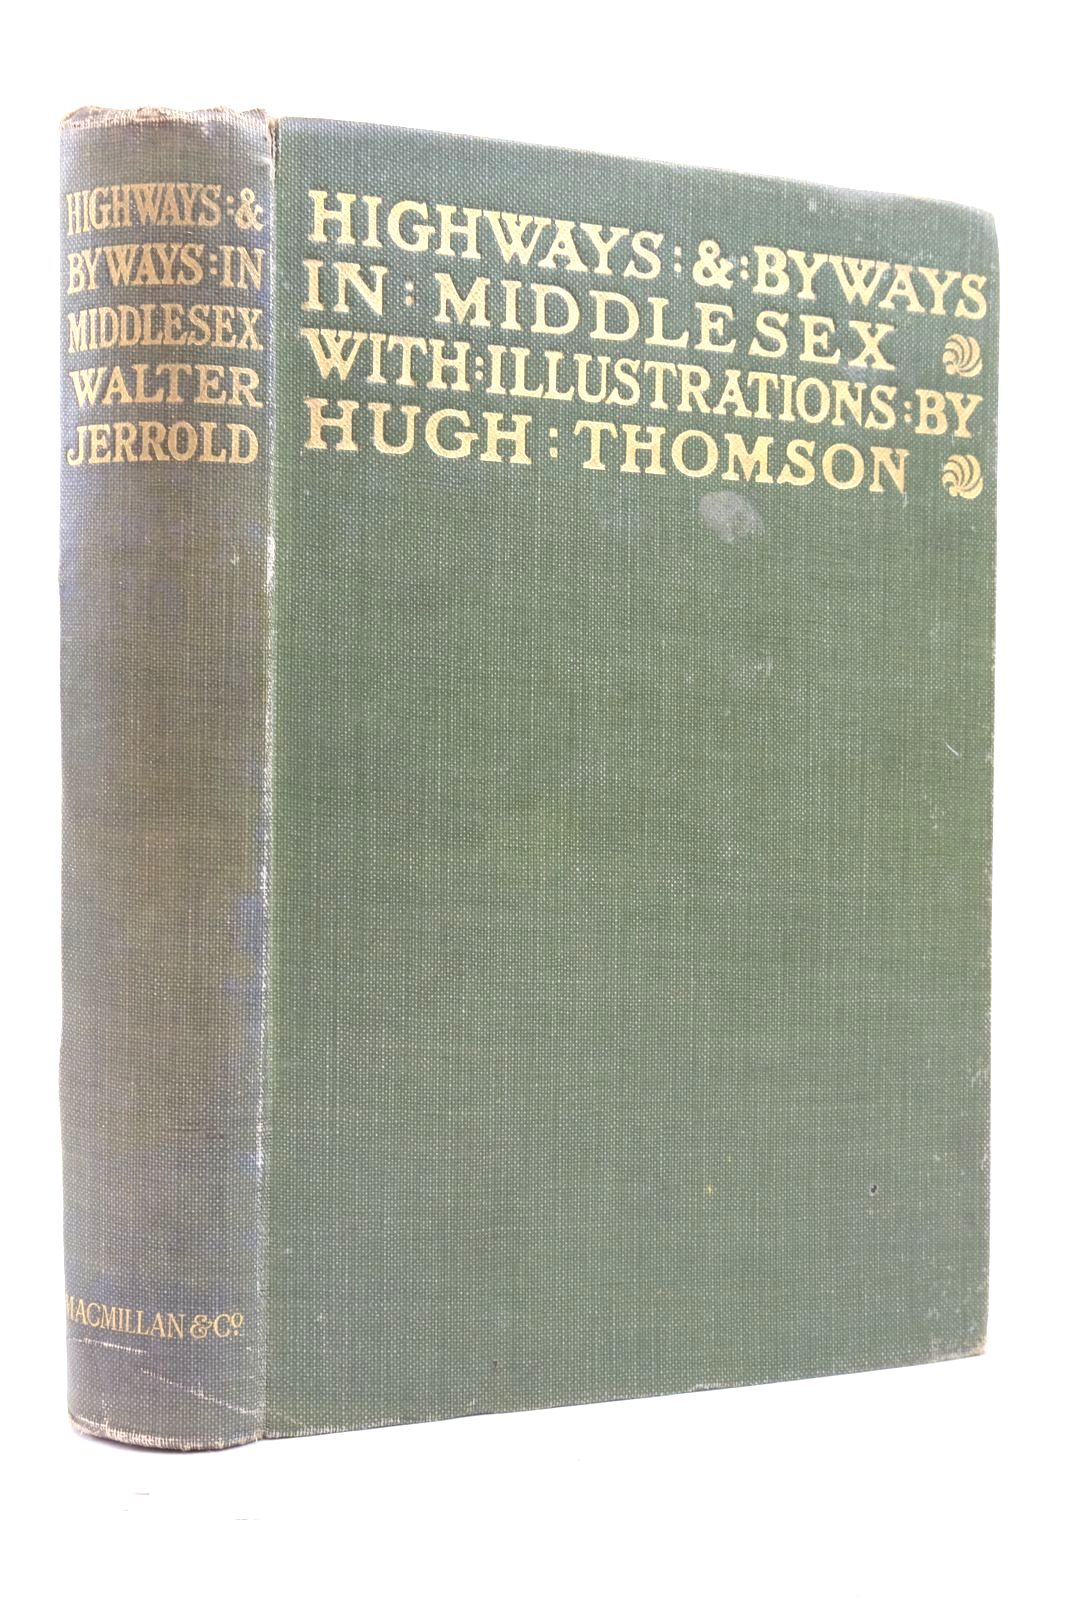 Photo of HIGHWAYS AND BYWAYS IN MIDDLESEX written by Jerrold, Walter illustrated by Thomson, Hugh published by Macmillan & Co. Ltd. (STOCK CODE: 2137635)  for sale by Stella & Rose's Books